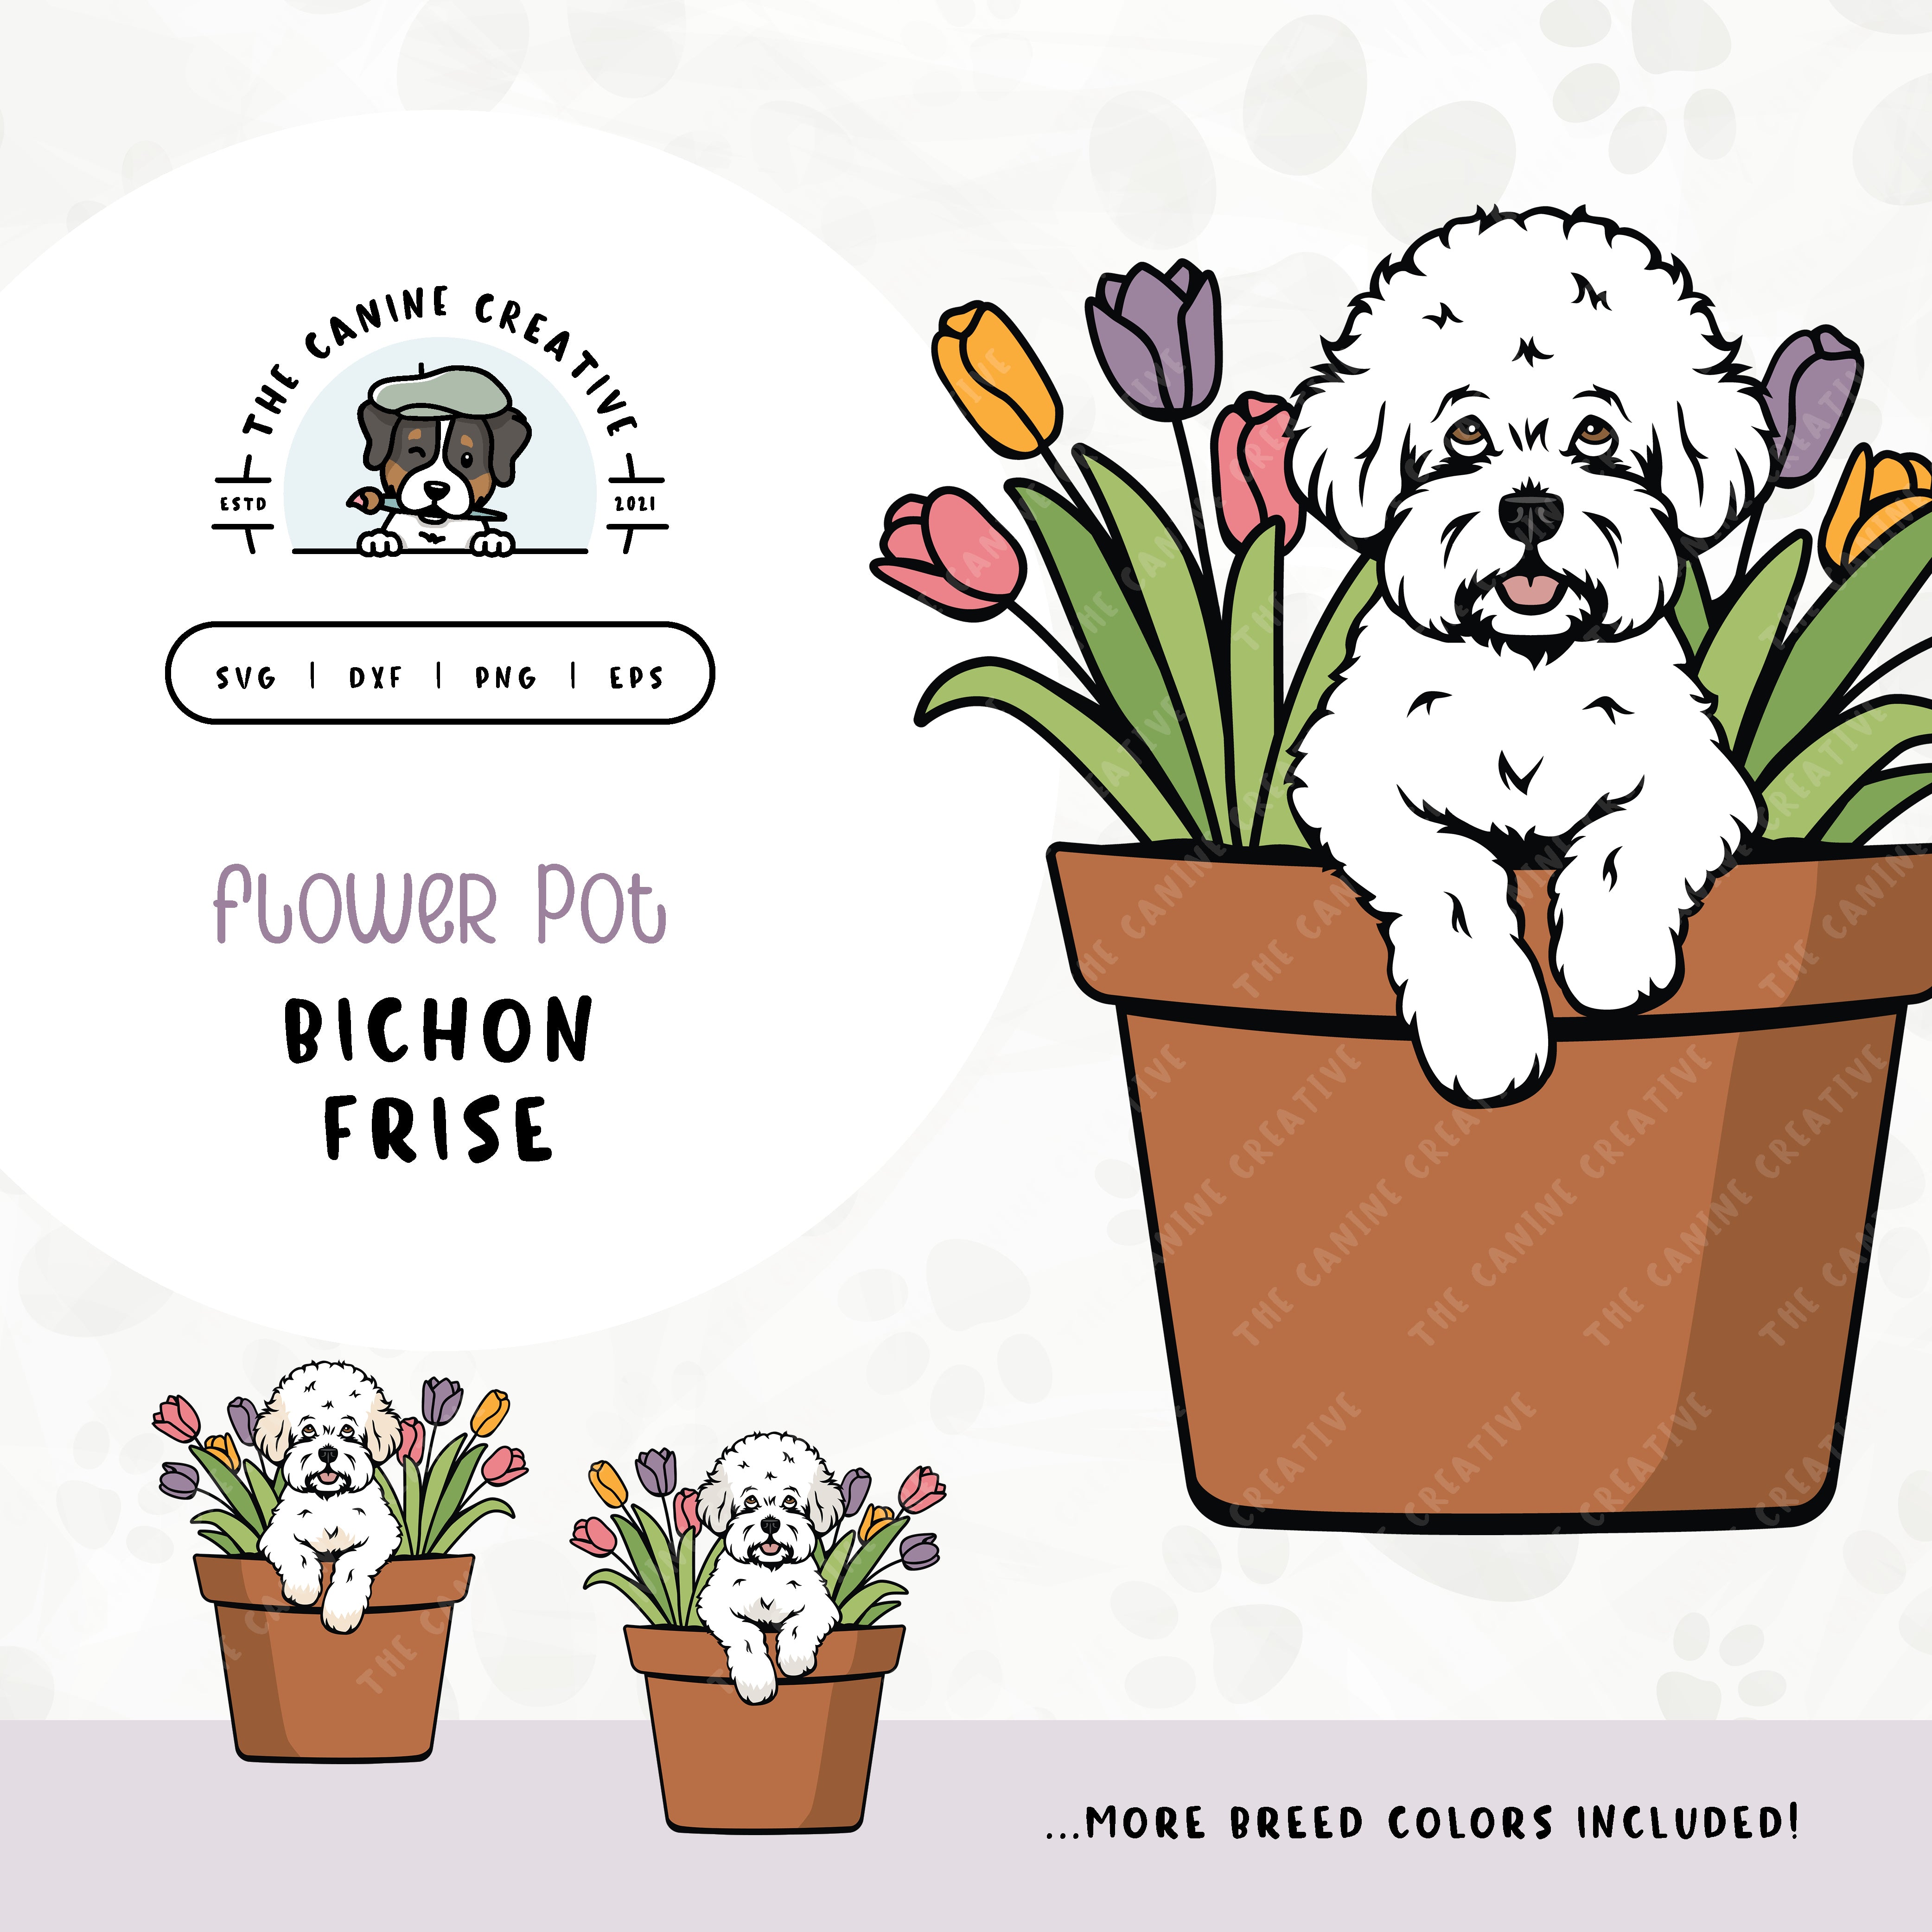 This springtime illustration features a Bichon Frise peeking out of a pot of vibrant tulips. File formats include: SVG, DXF, PNG, and EPS.